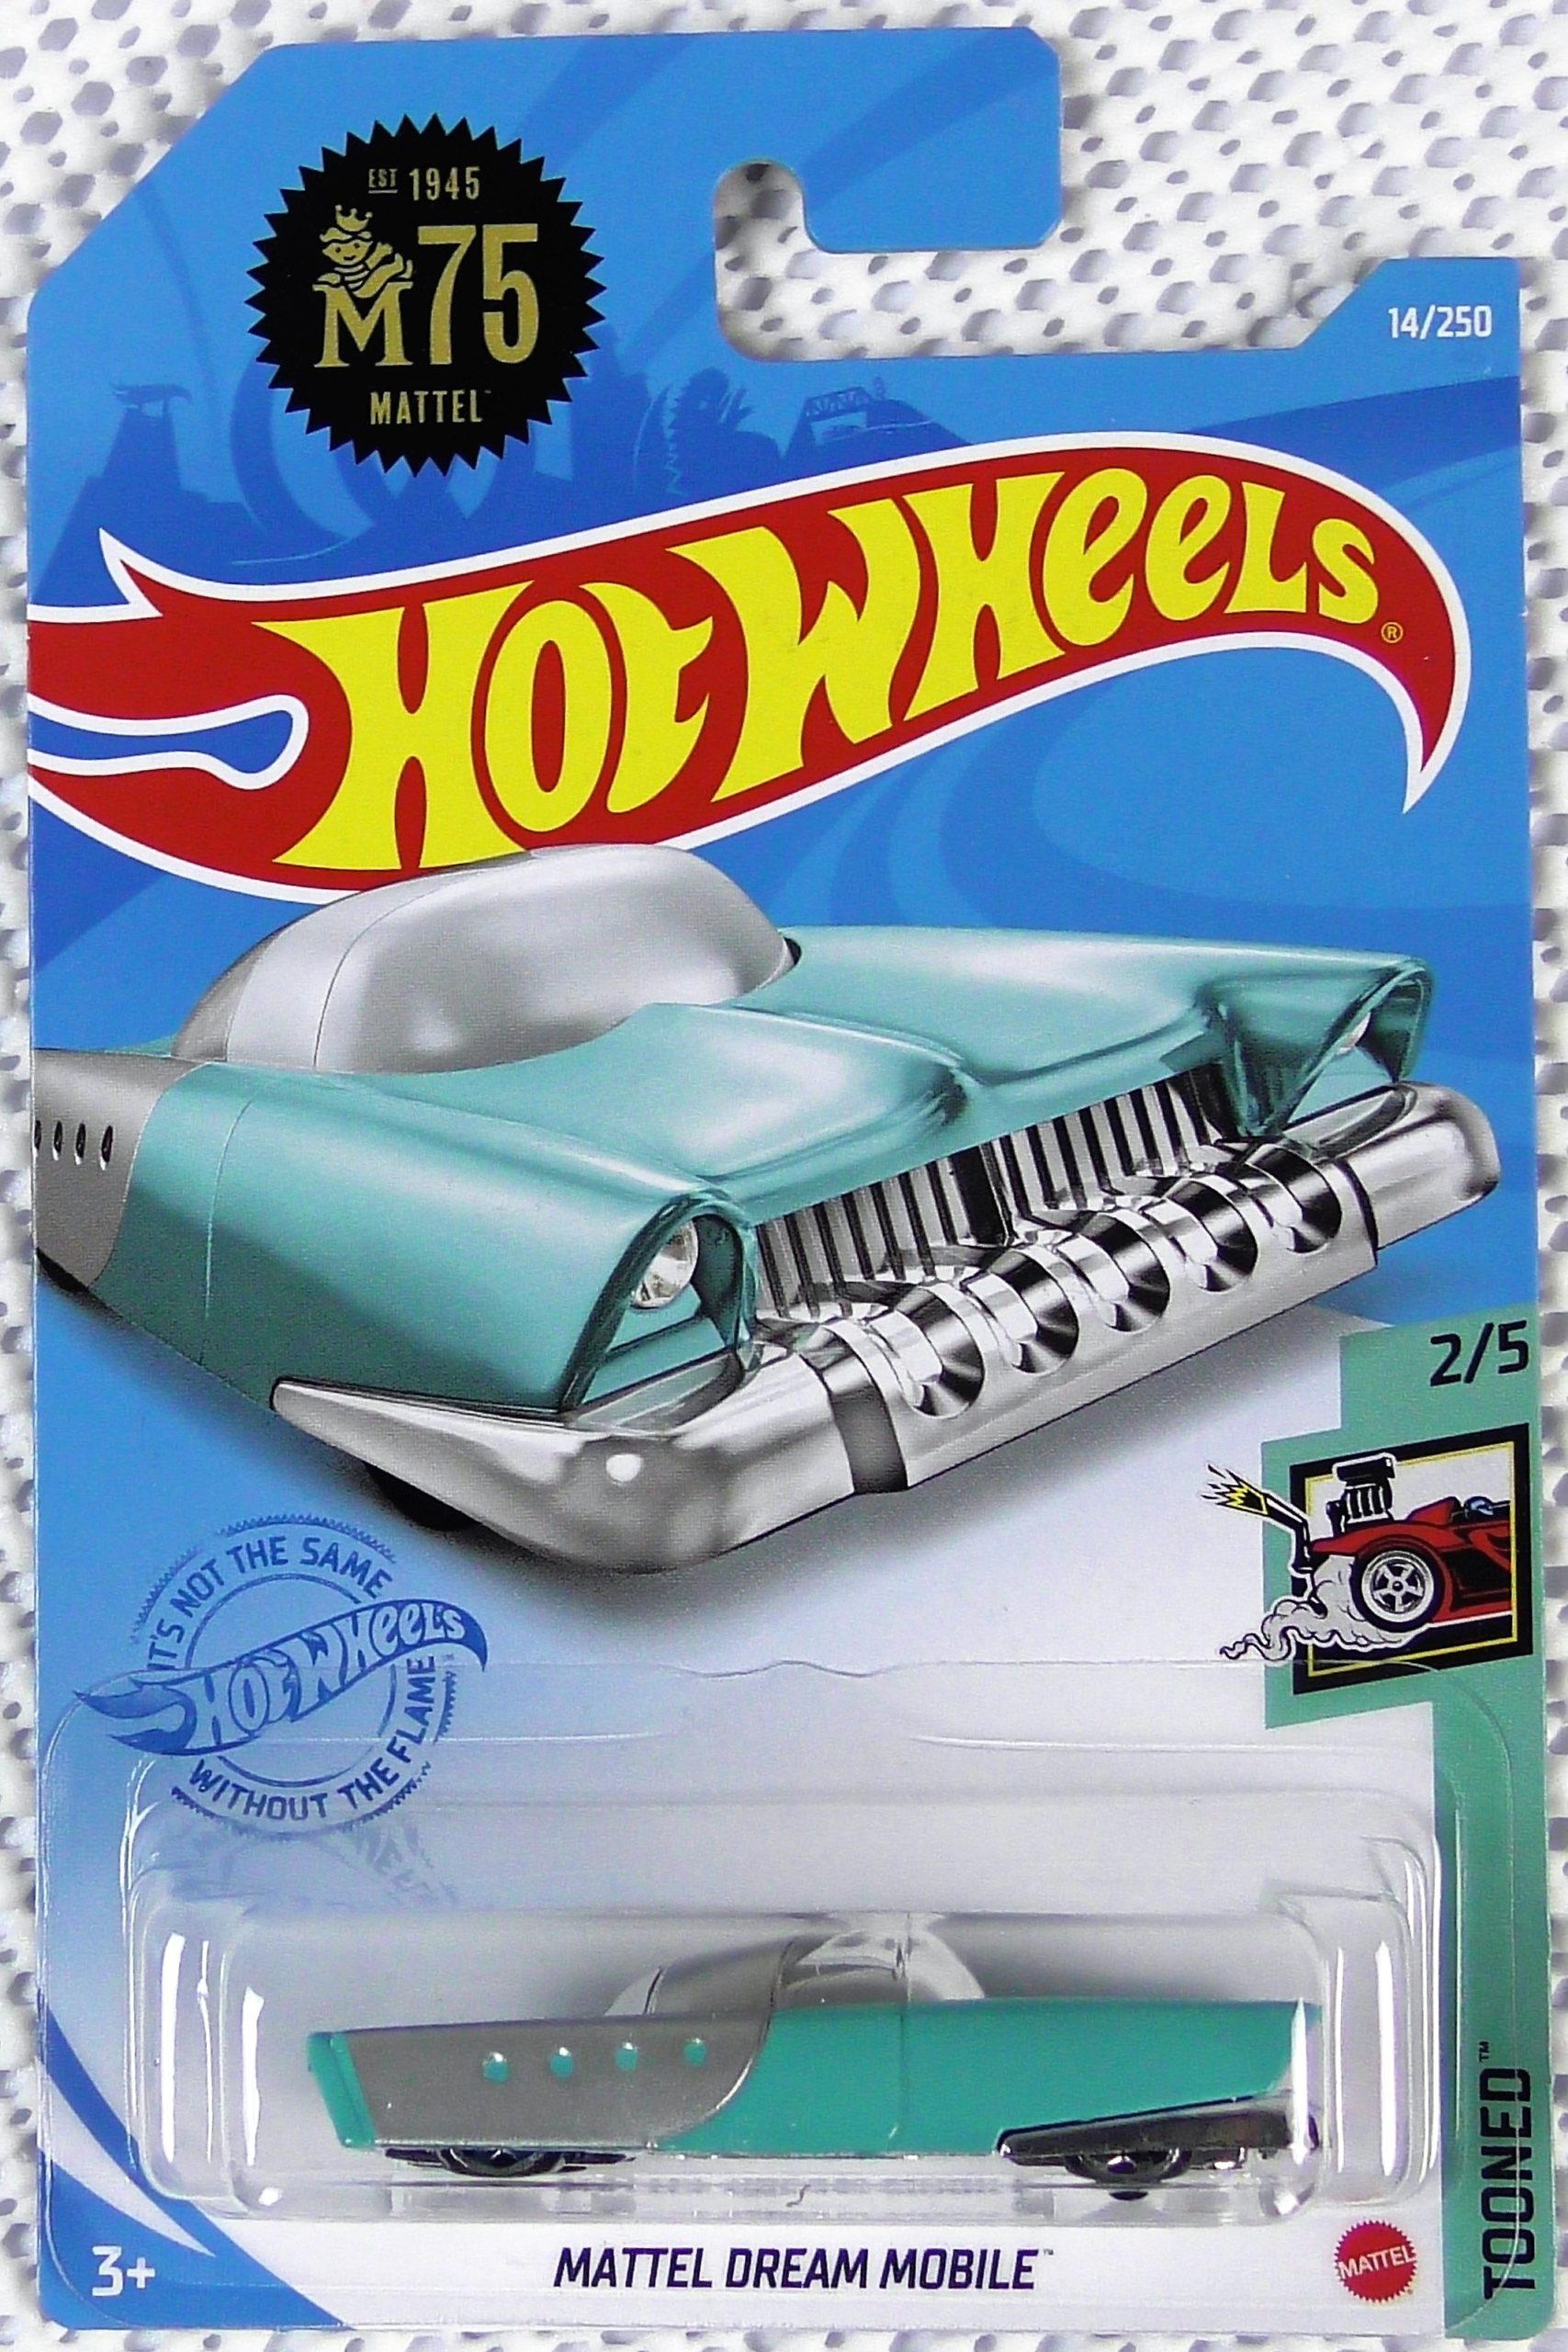 2021 Hot Wheels Price Guide.